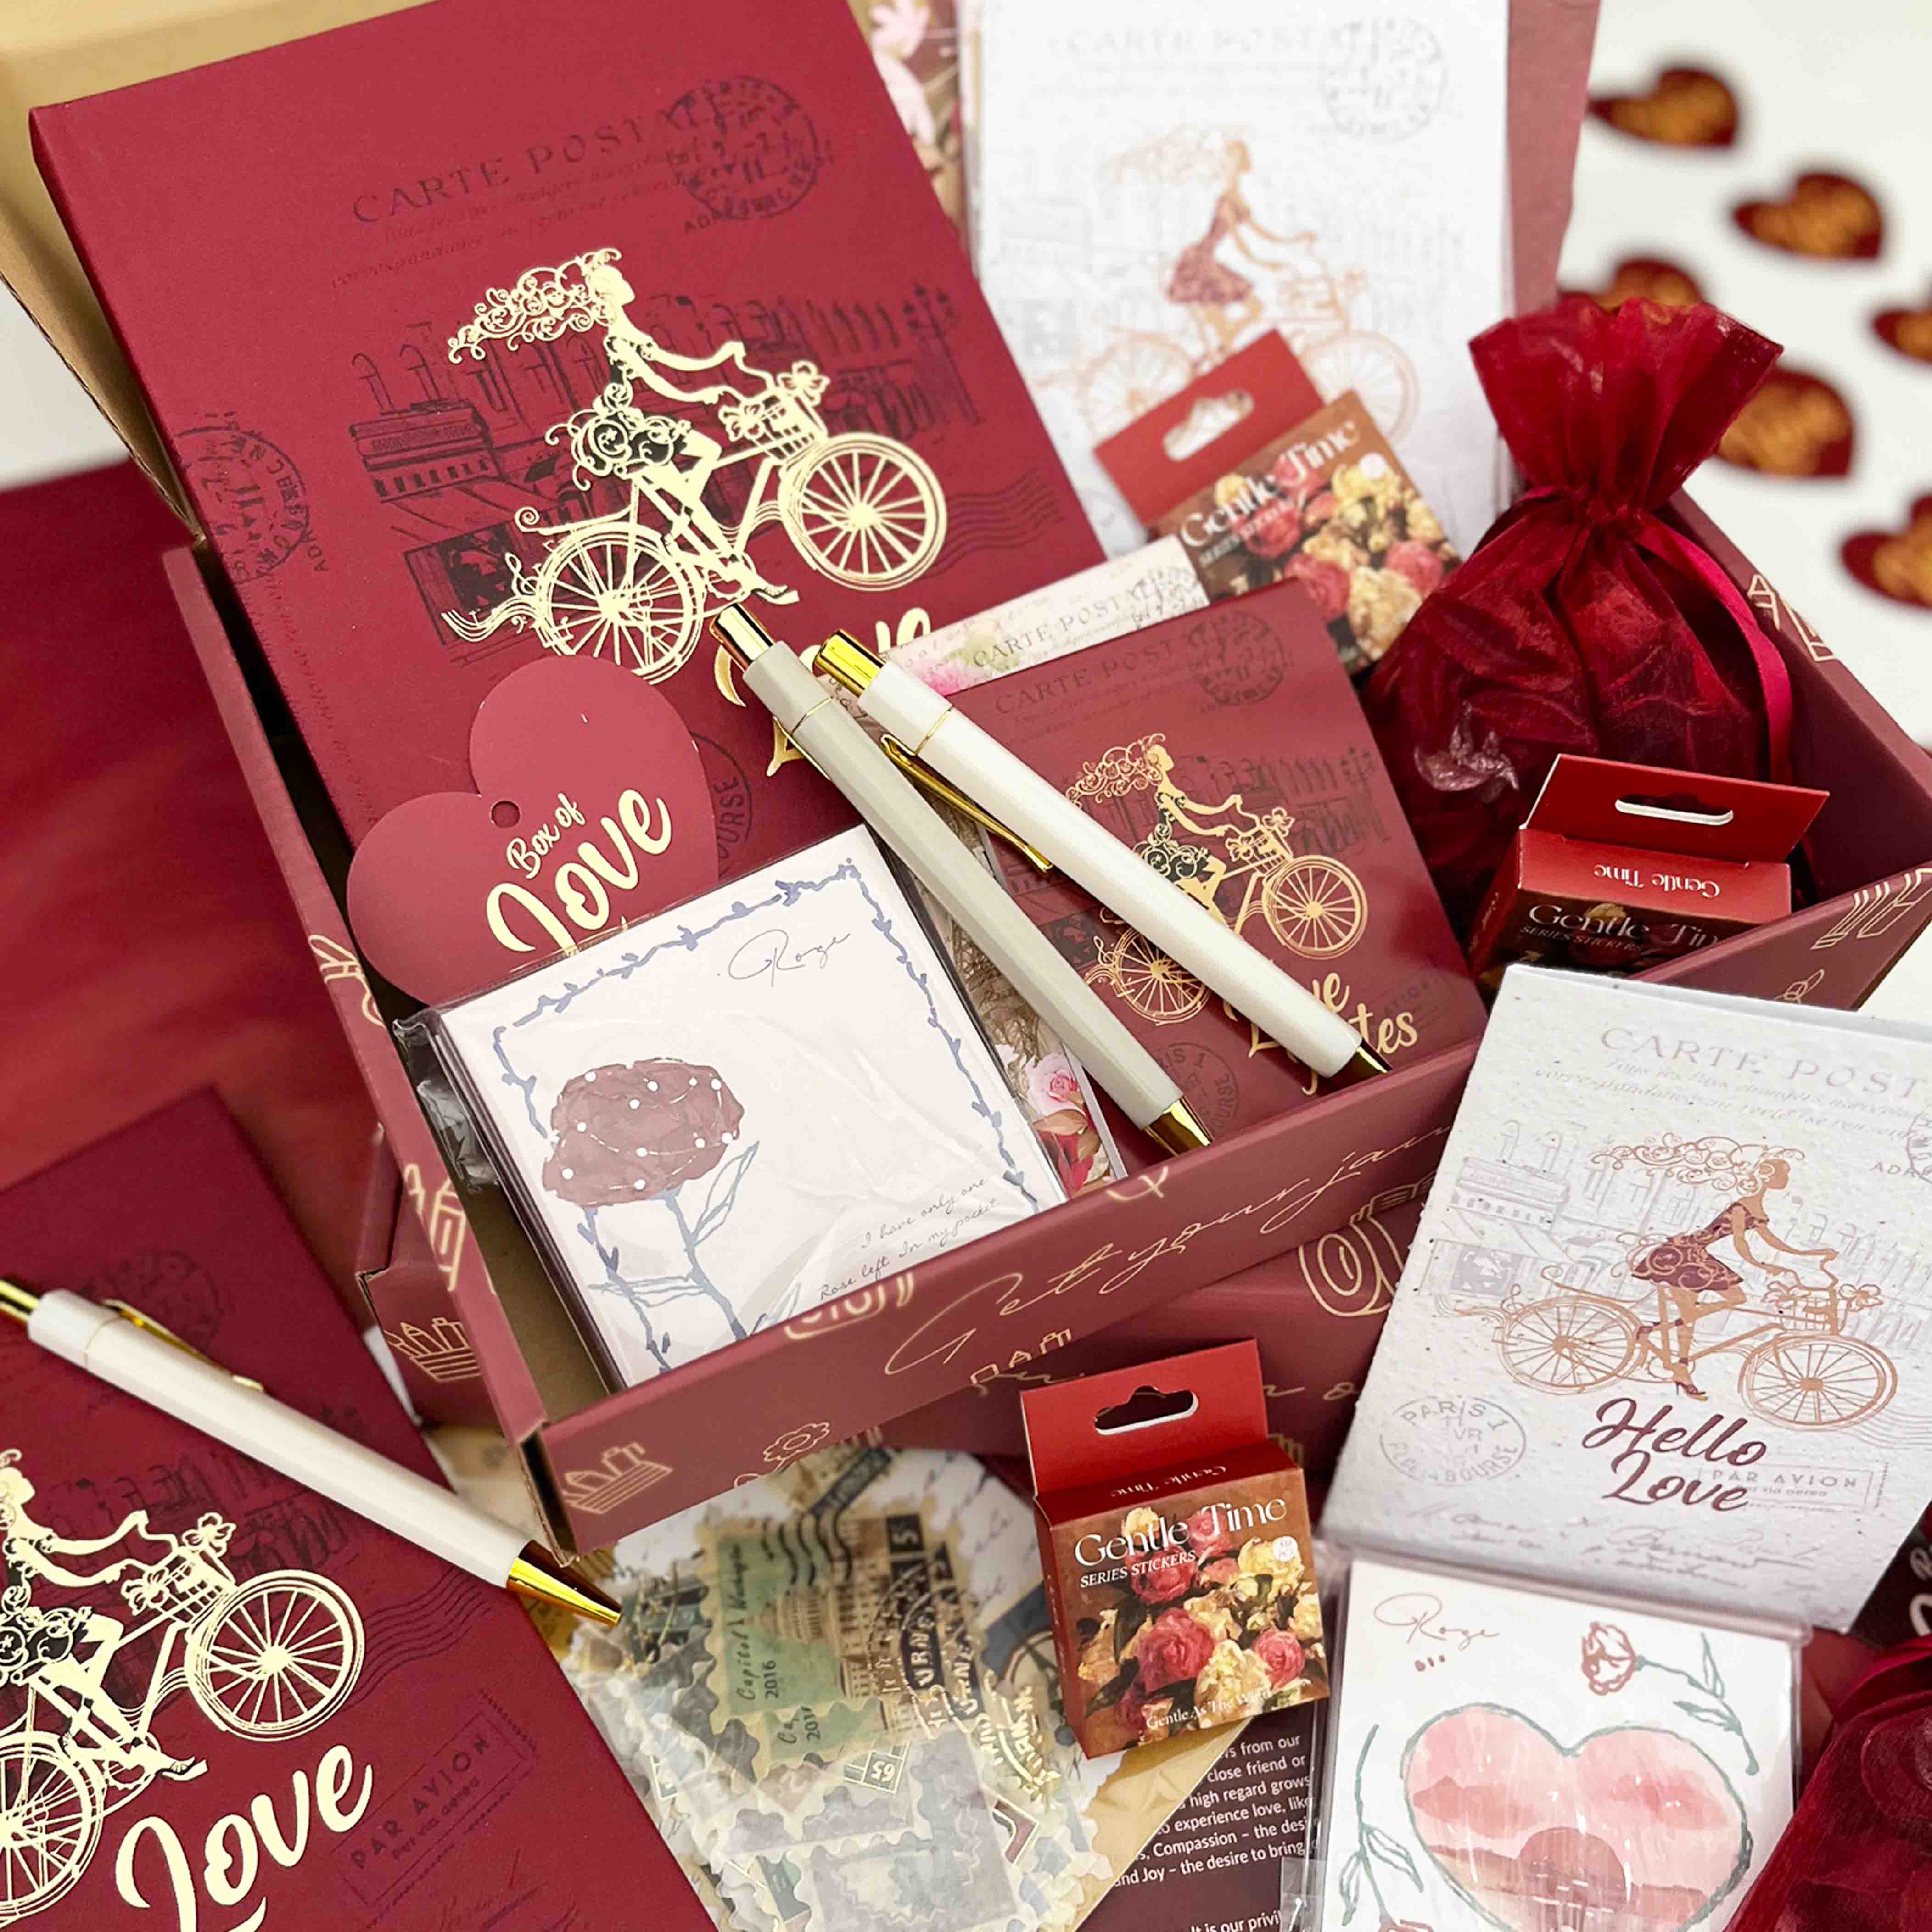 Image shows a love themed stationery box with it's contents